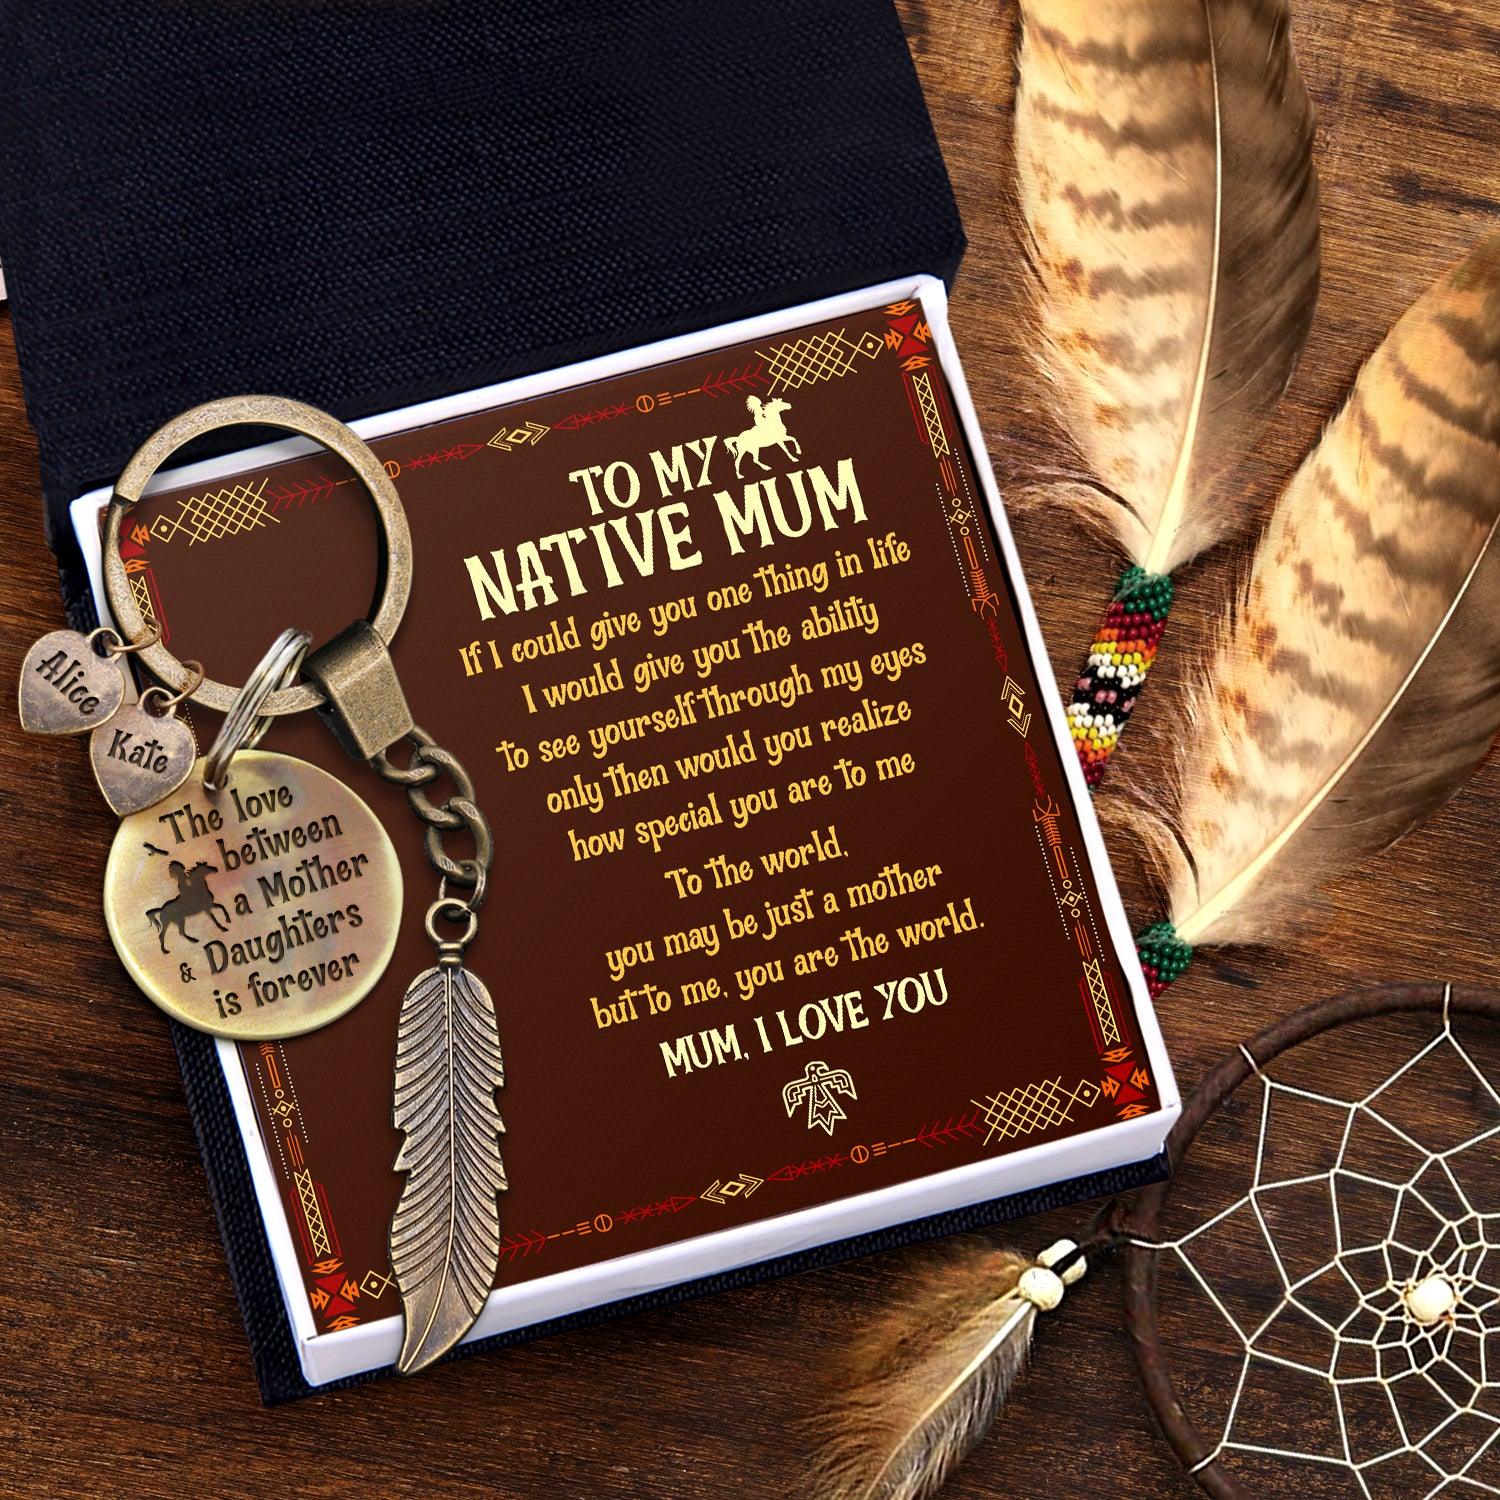 Personalised Feather Keychain - Native American - To My Native Mum - From Daughter - You Are The World - Augkdz19002 - Gifts Holder